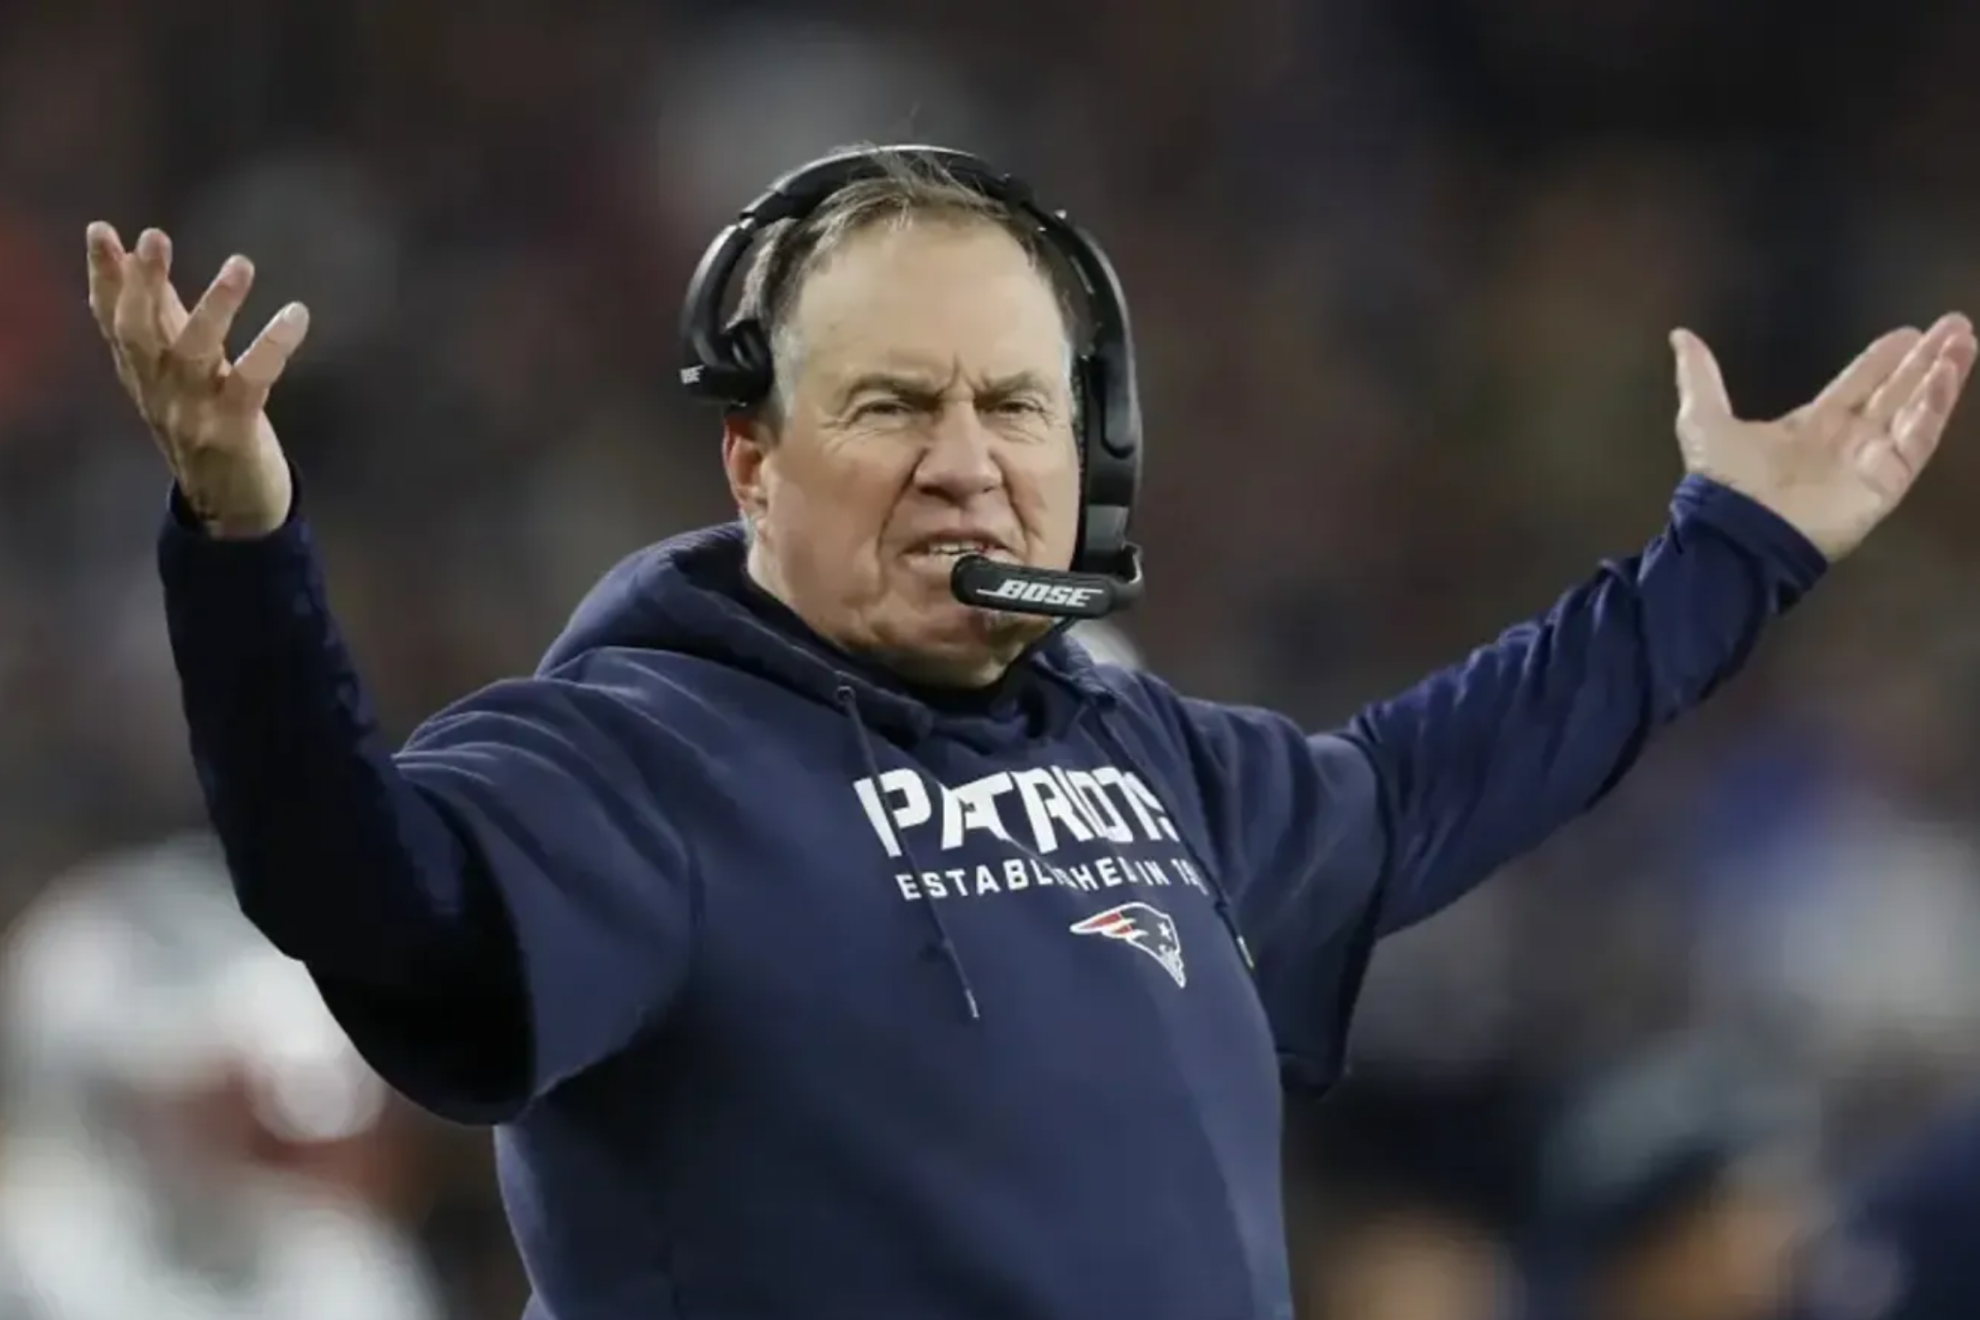 Stephen A. Smiths harsh criticism of Bill Belichick to hinder his arrival on TV